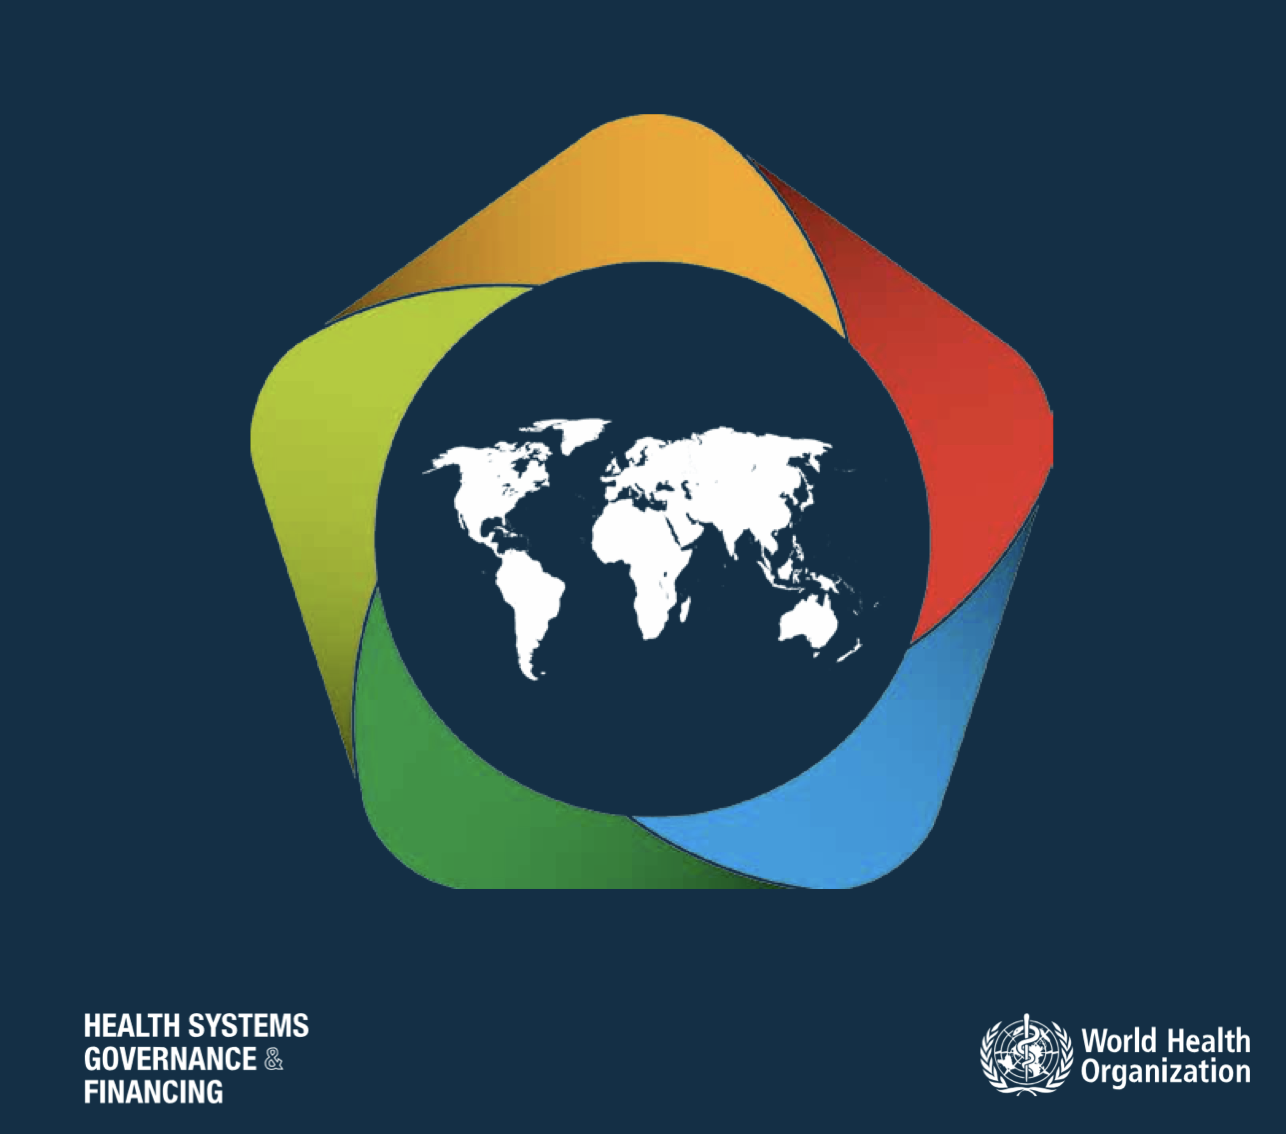 Fiscal space, public financial management, and health financing: Sustaining progress towards UHC: Implementation of the collaborative agenda